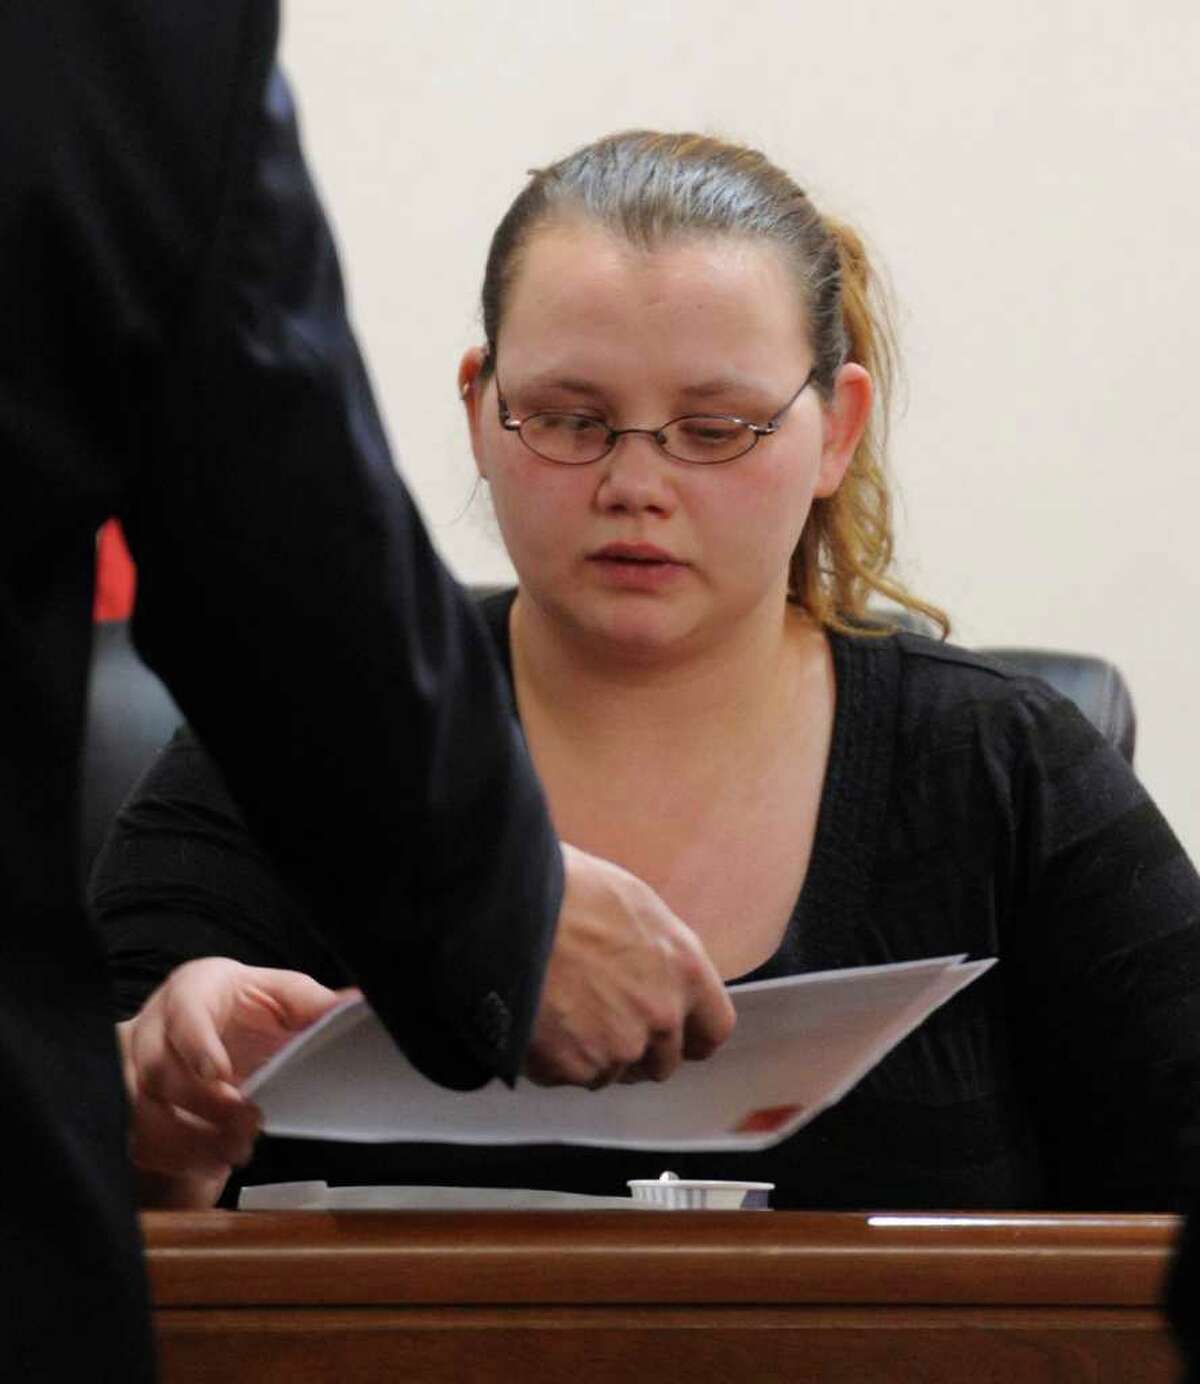 Loretta Colegrove looks over some of the evidence while on the stand during the trial of Matthew Slocum, her boyfriend, in Washington County Court in Fort Edward, N.Y. March 1, 2012. Slocum is accused of killing three people in White Creek last year and Colegrove testified that she saw him kill one of the people. (Skip Dickstein / Times Union)